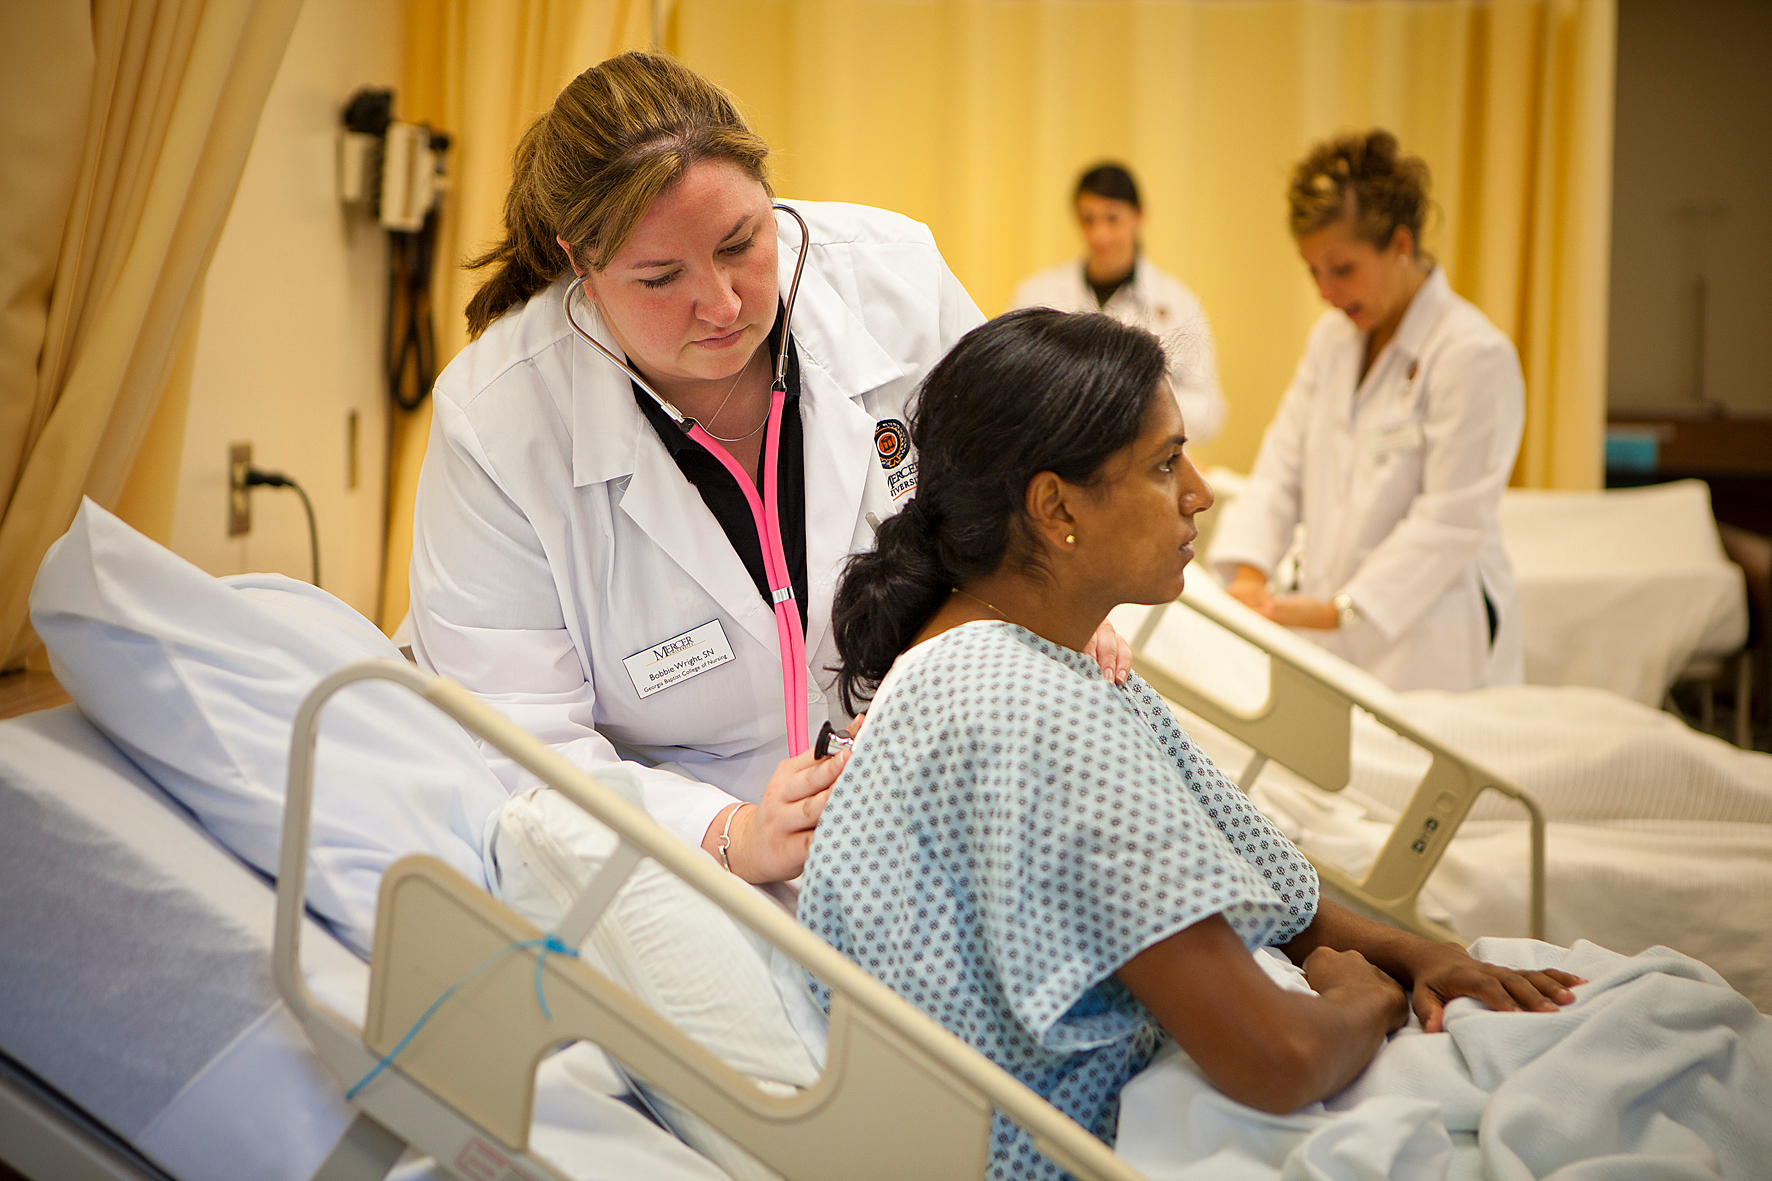 a woman wearing a white coat uses a stethoscope to check the lungs of a person sitting in a hospital bed